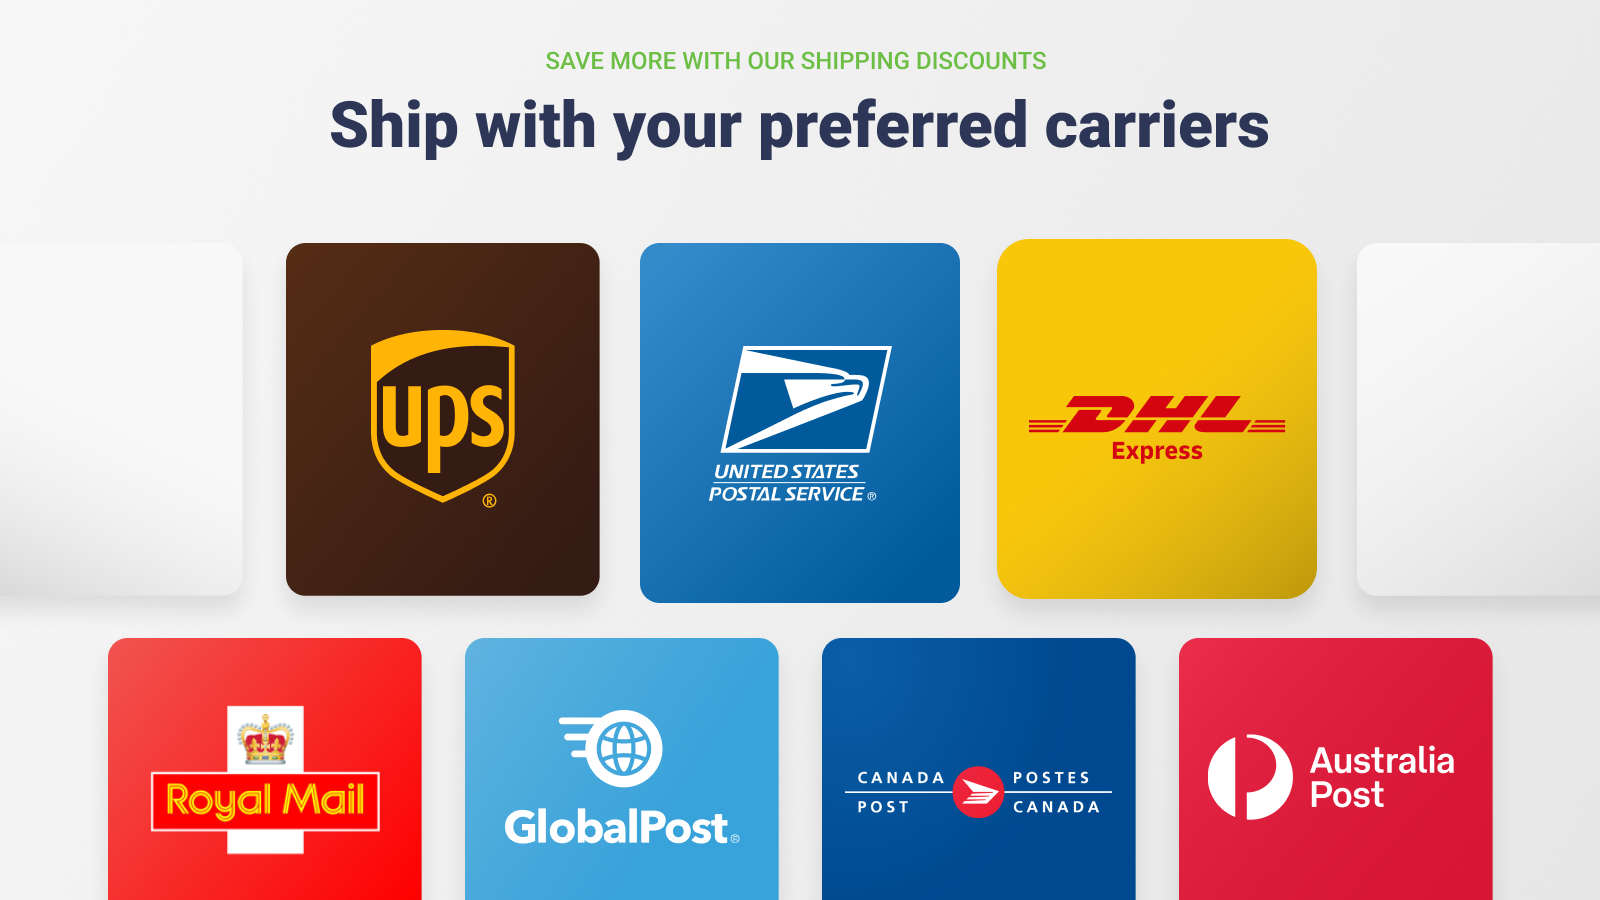 Save on shipping with discounted rates and connect your accounts